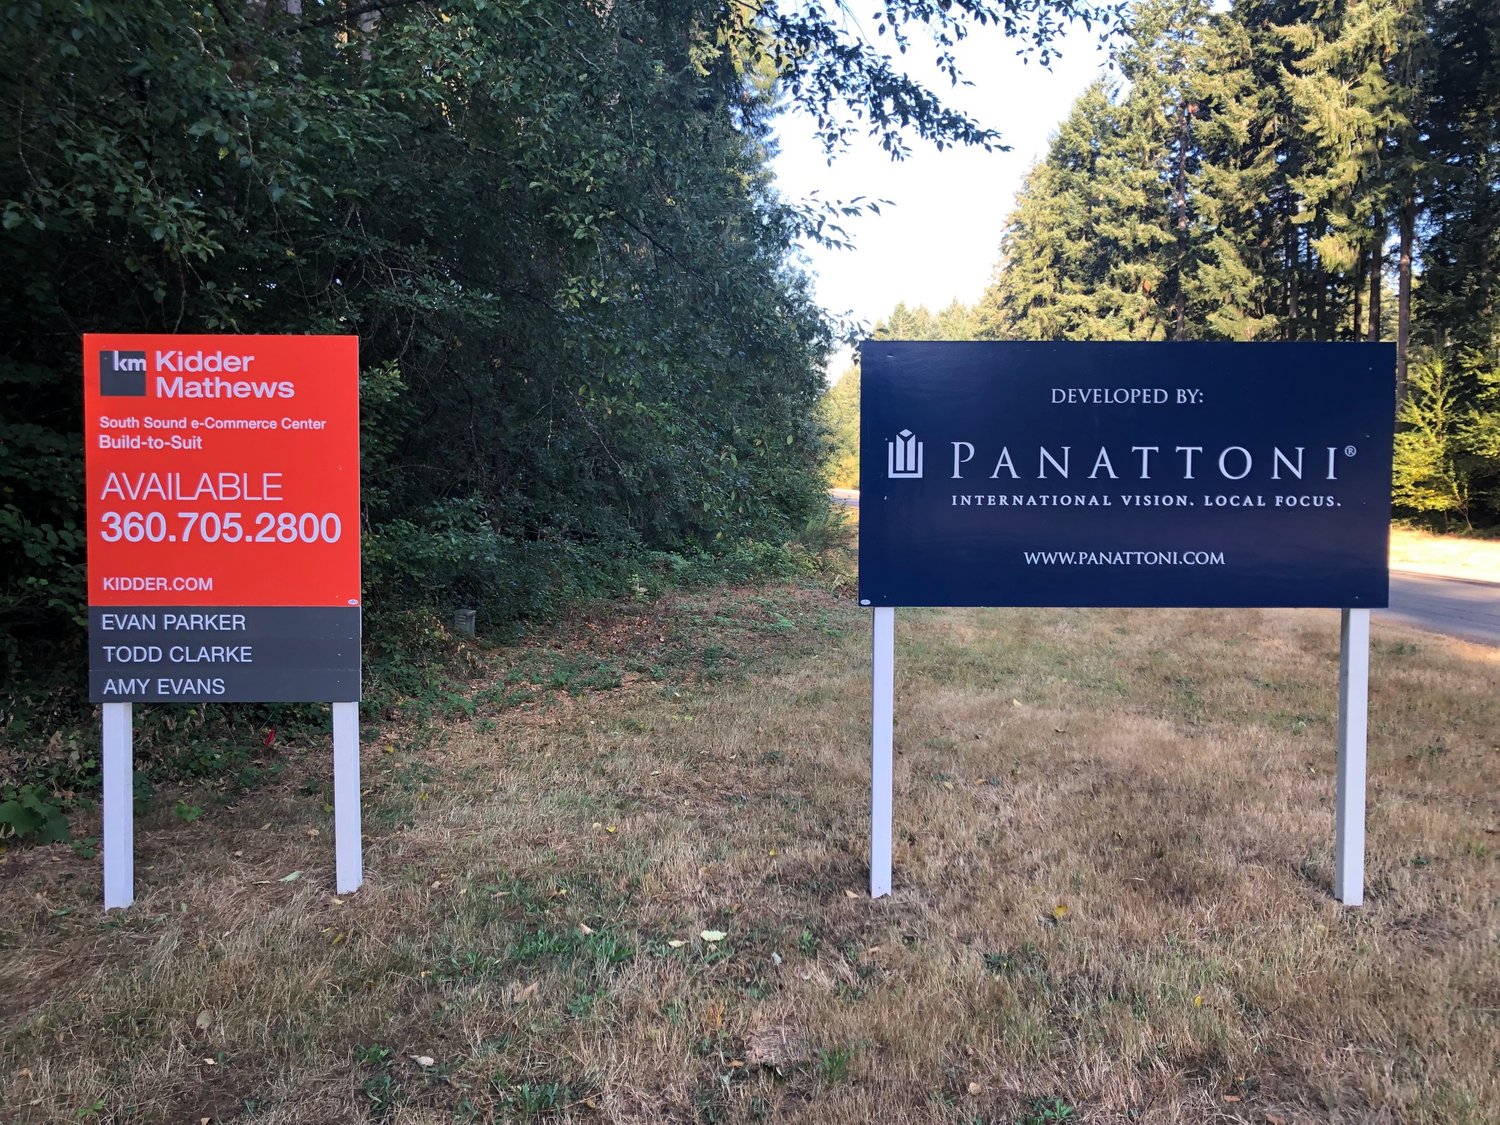 Panattoni signs declaring the company as a developer already appear on Center Street in Tumwater in this August 2021 photo.